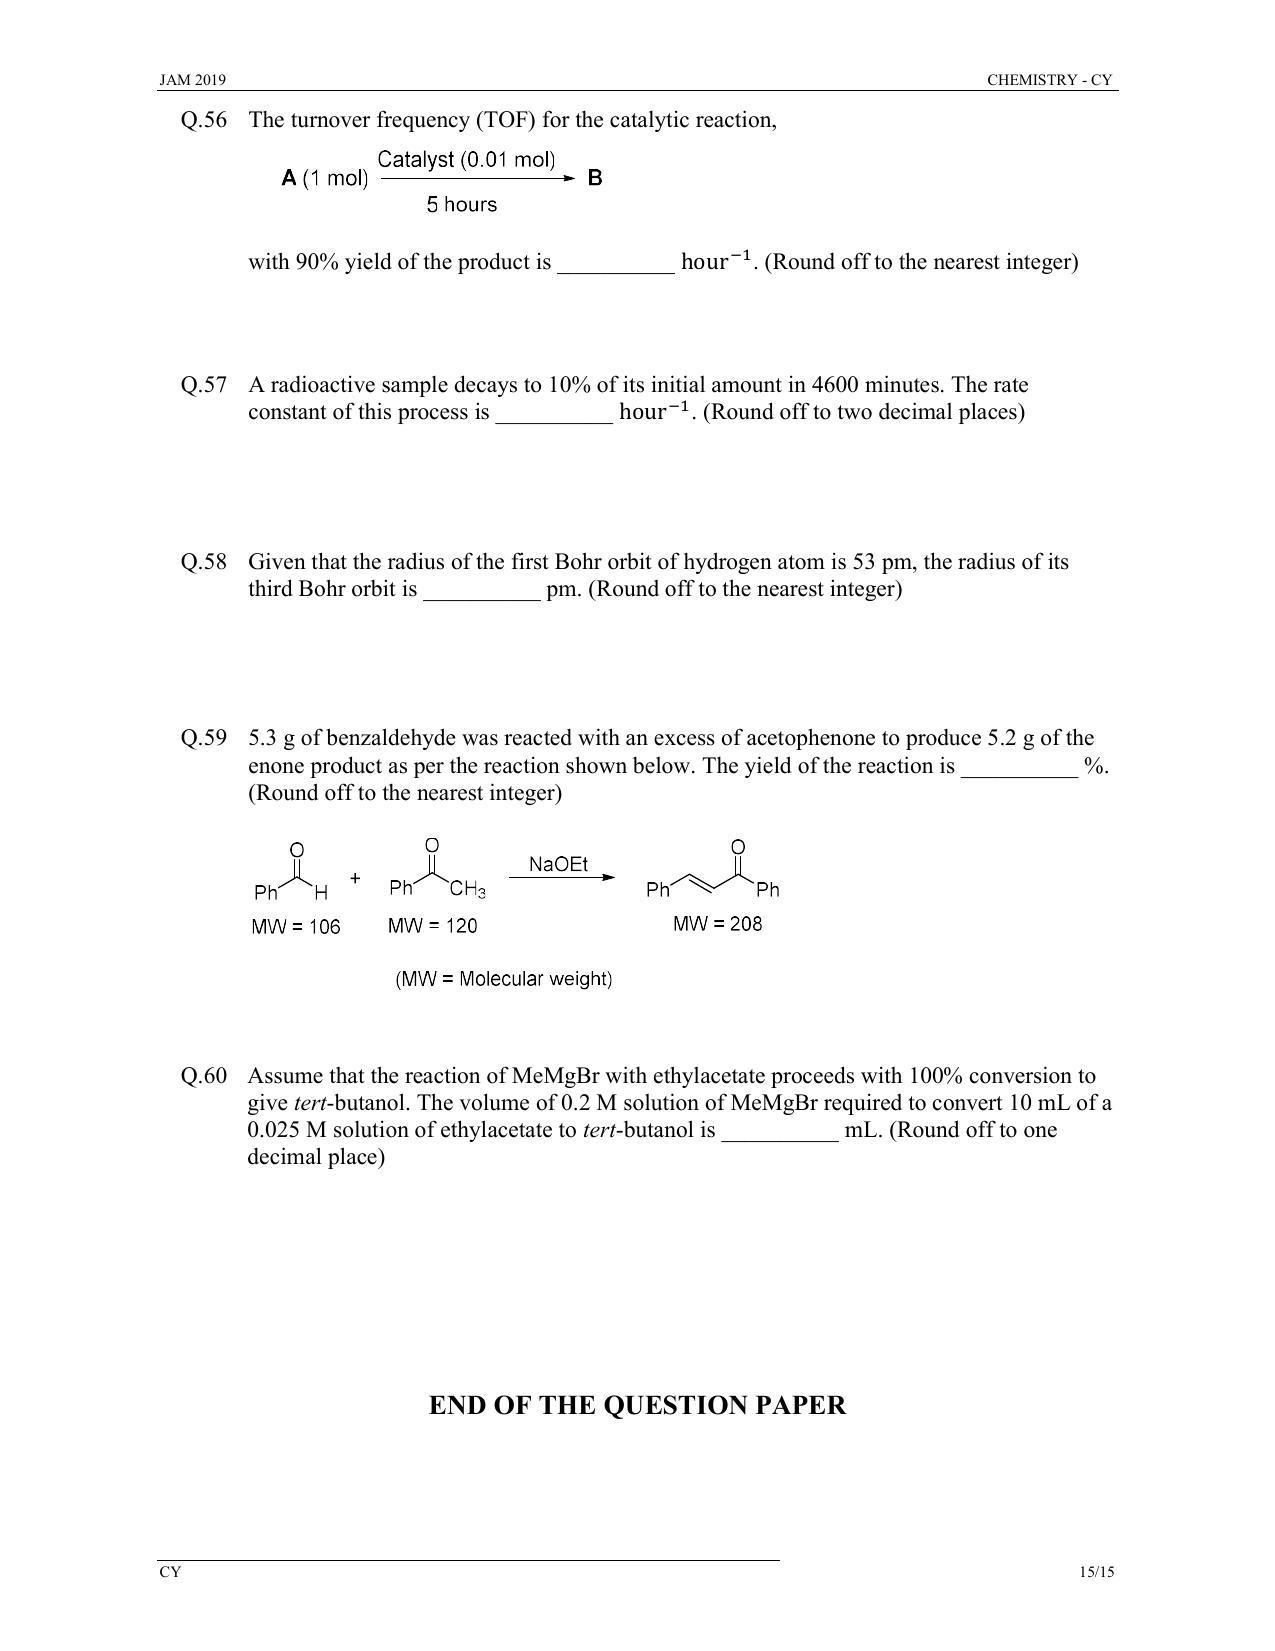 JAM 2019: CY Question Paper - Page 15